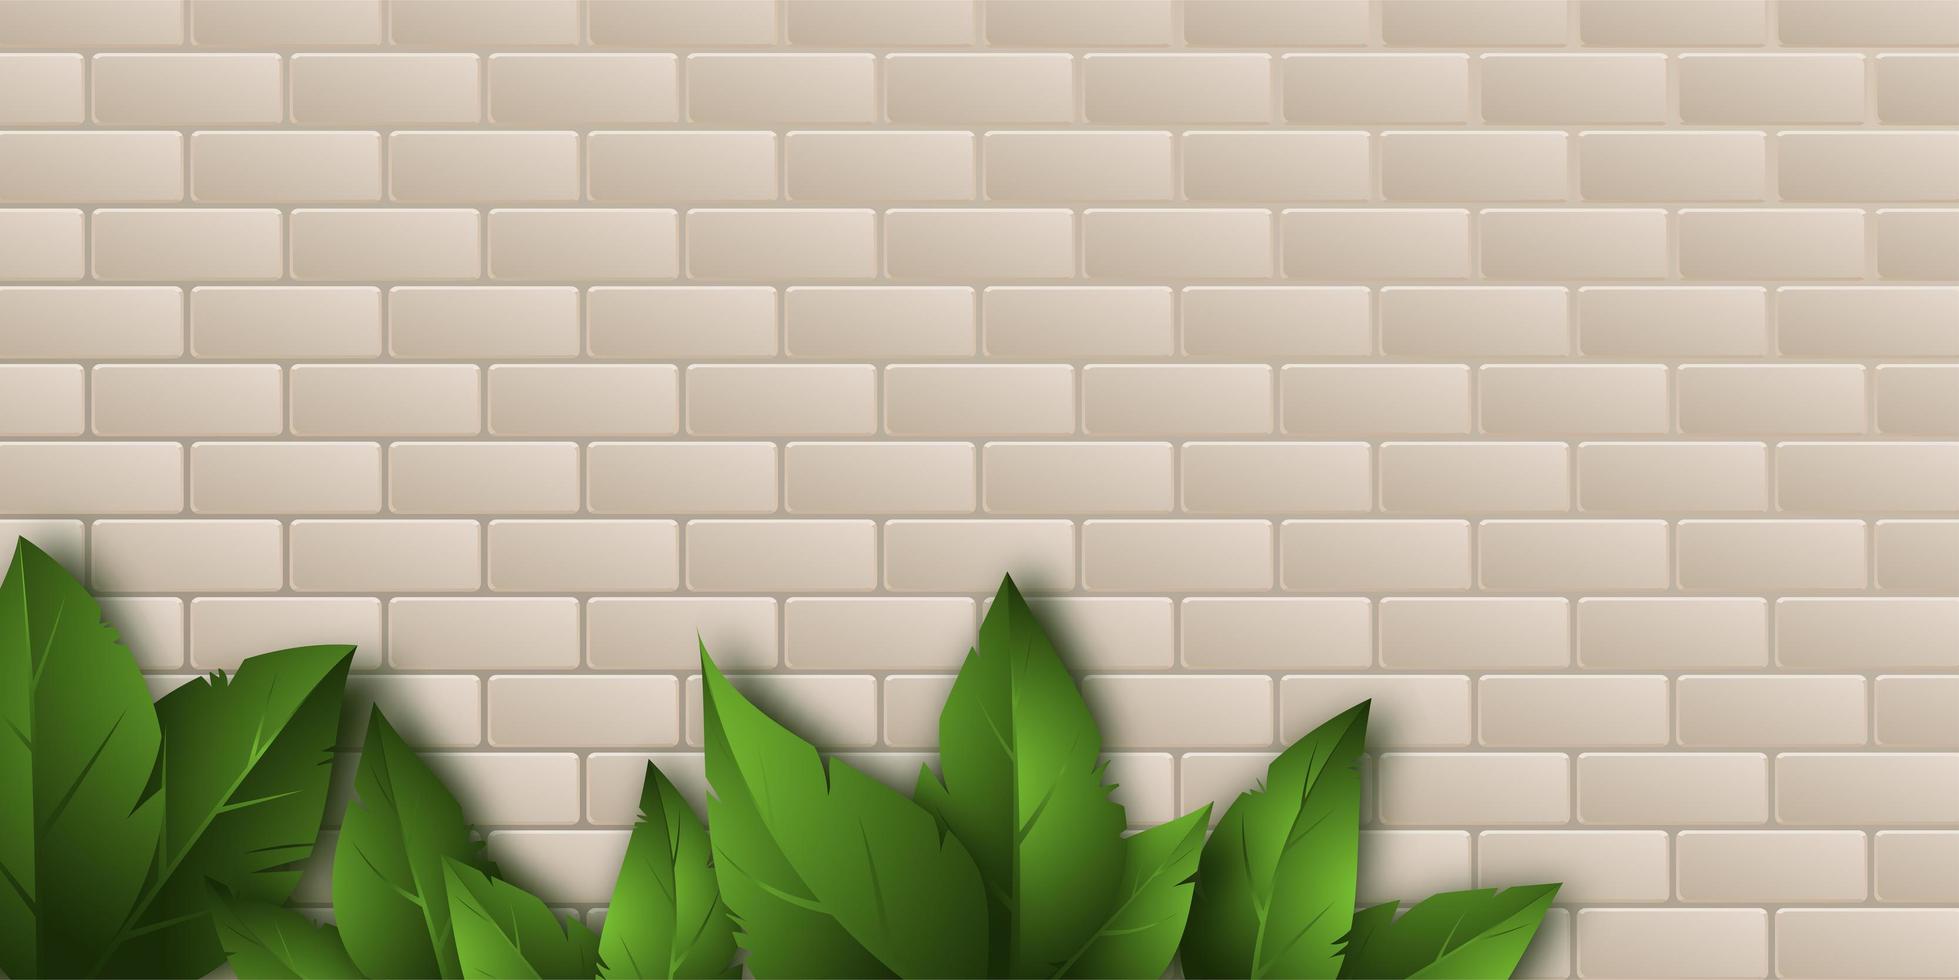 Realistic green leaves cast a beautiful shadow on the beige brickwork. Place for your text. Texture of bricks. Vector illustration